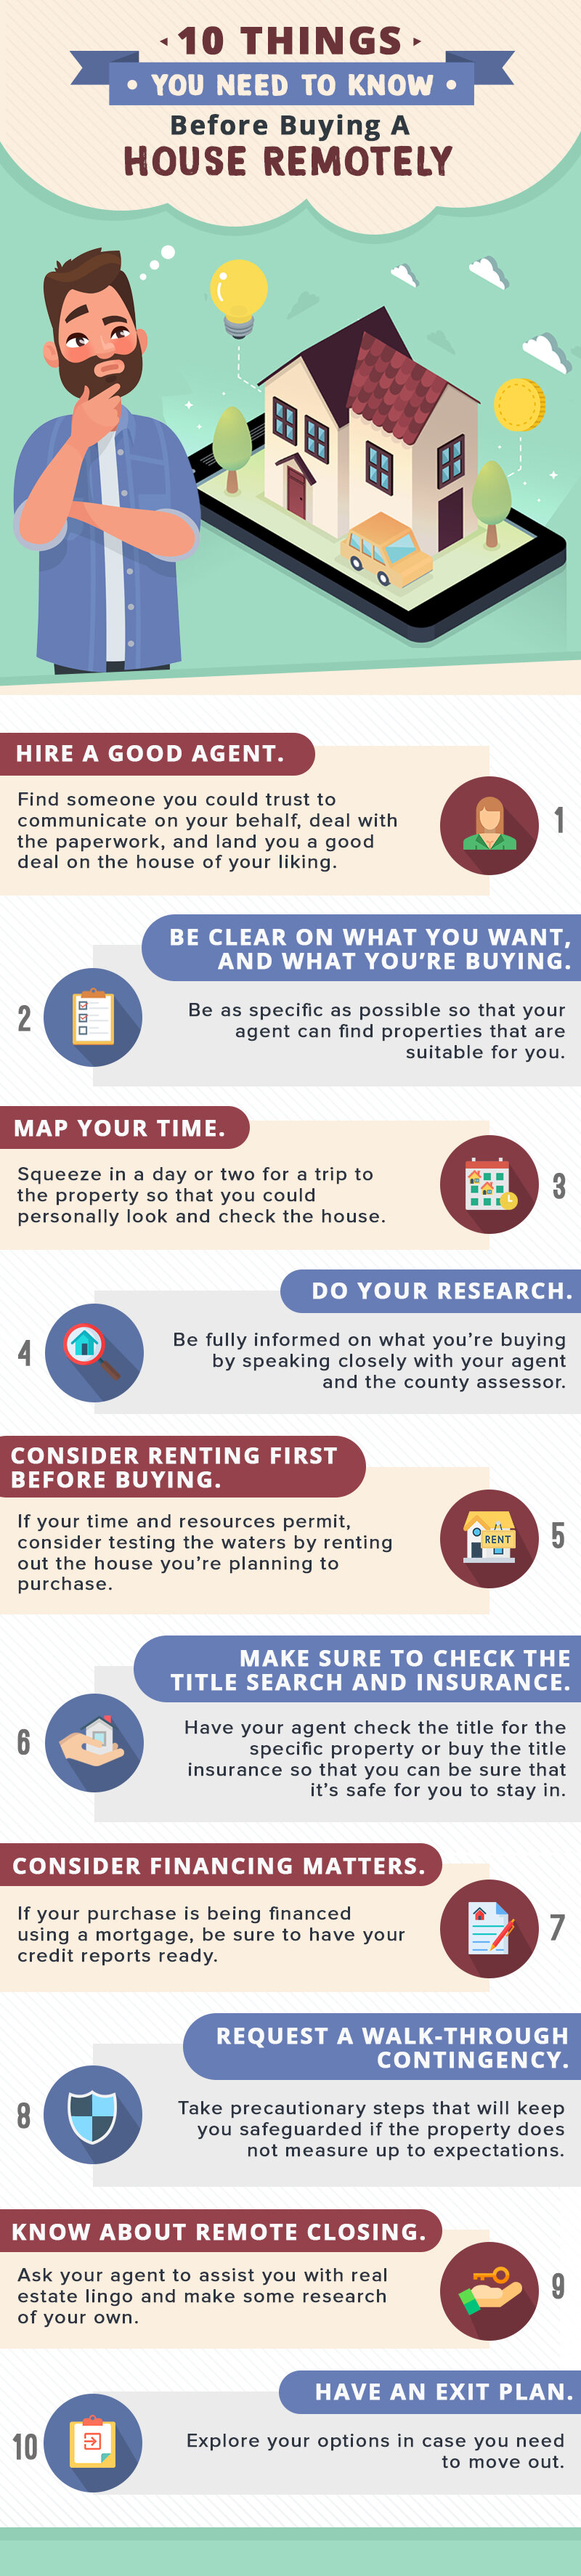 10 Things You Need To Know Before Buying A House Remotely